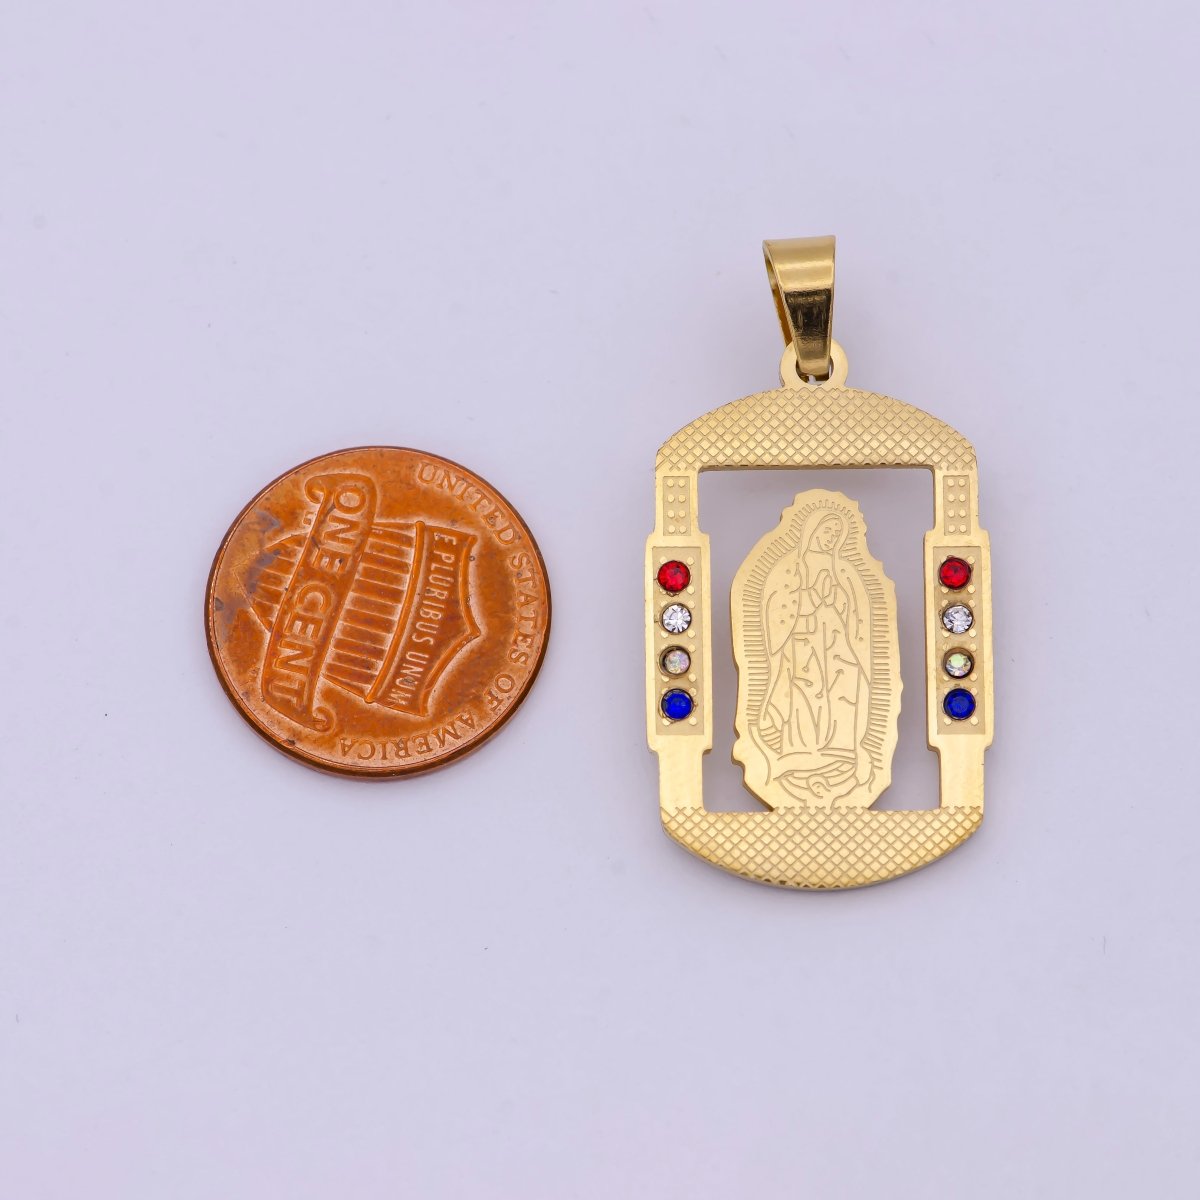 Military Tag Virgin Mary Charm for Necklace Gold Lady of Guadalupe Pendant for Religious Jewelry Making Supply in Gold Filled J-316 - DLUXCA